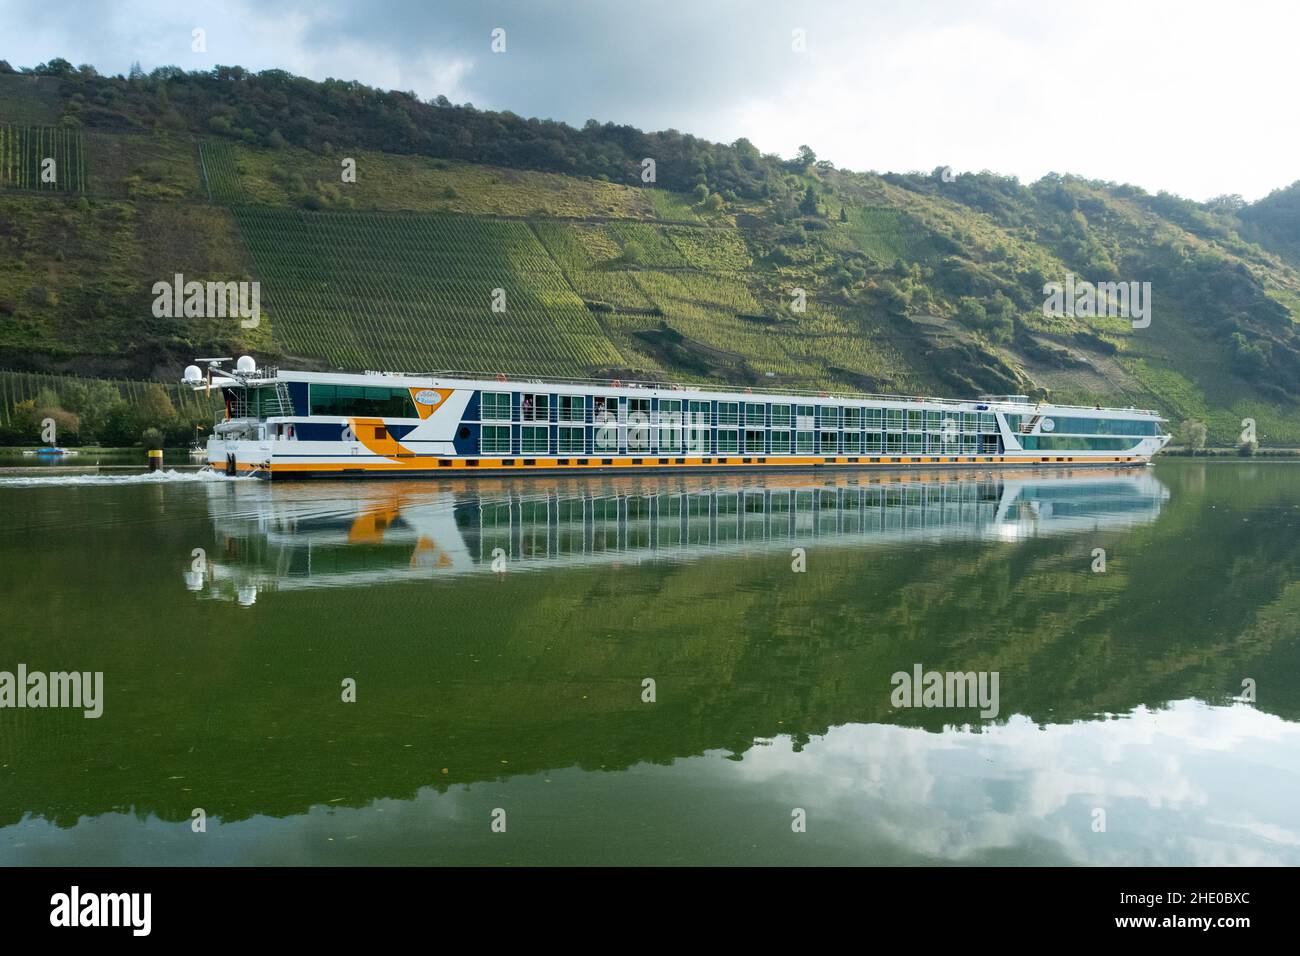 Moselle (Mosel) river cruise boat MS VistaStar - Germany, Europe Stock Photo